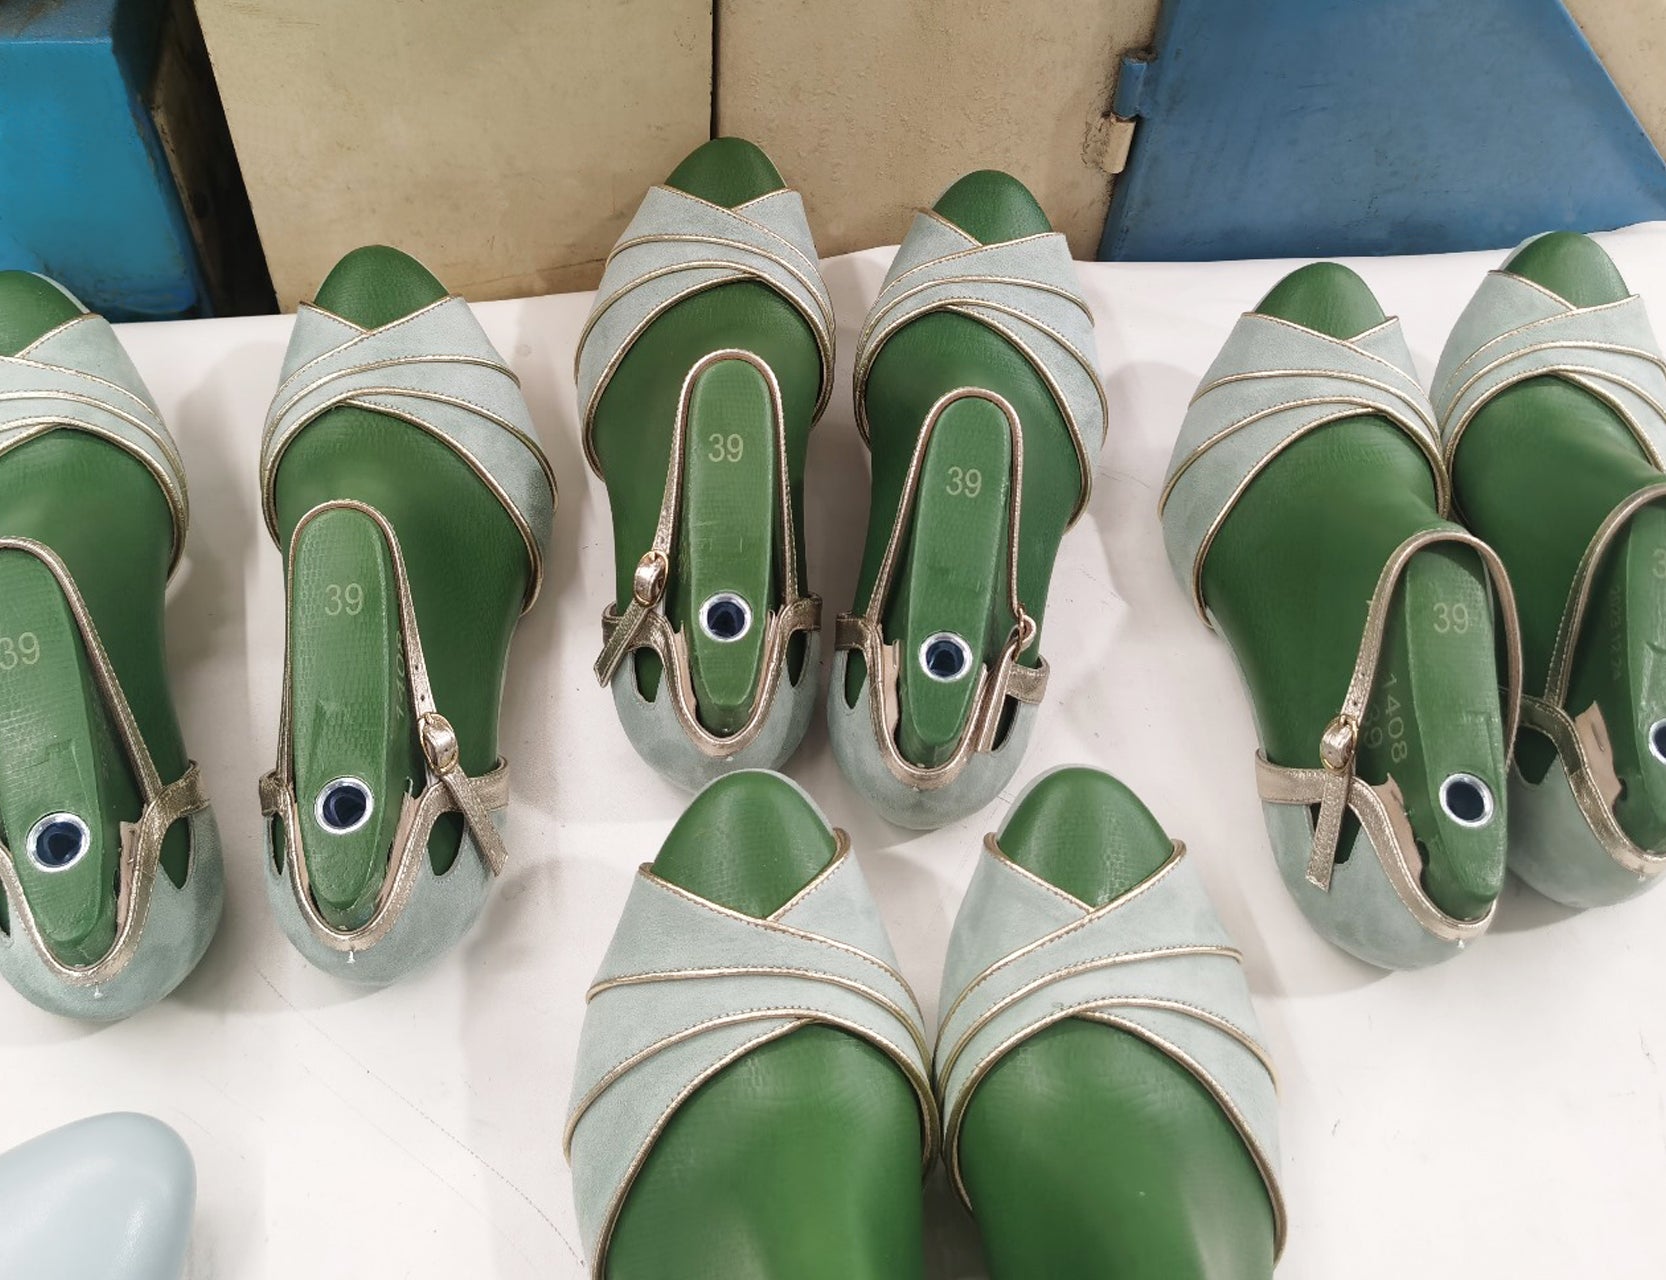 Mint green suede shoes on a production line